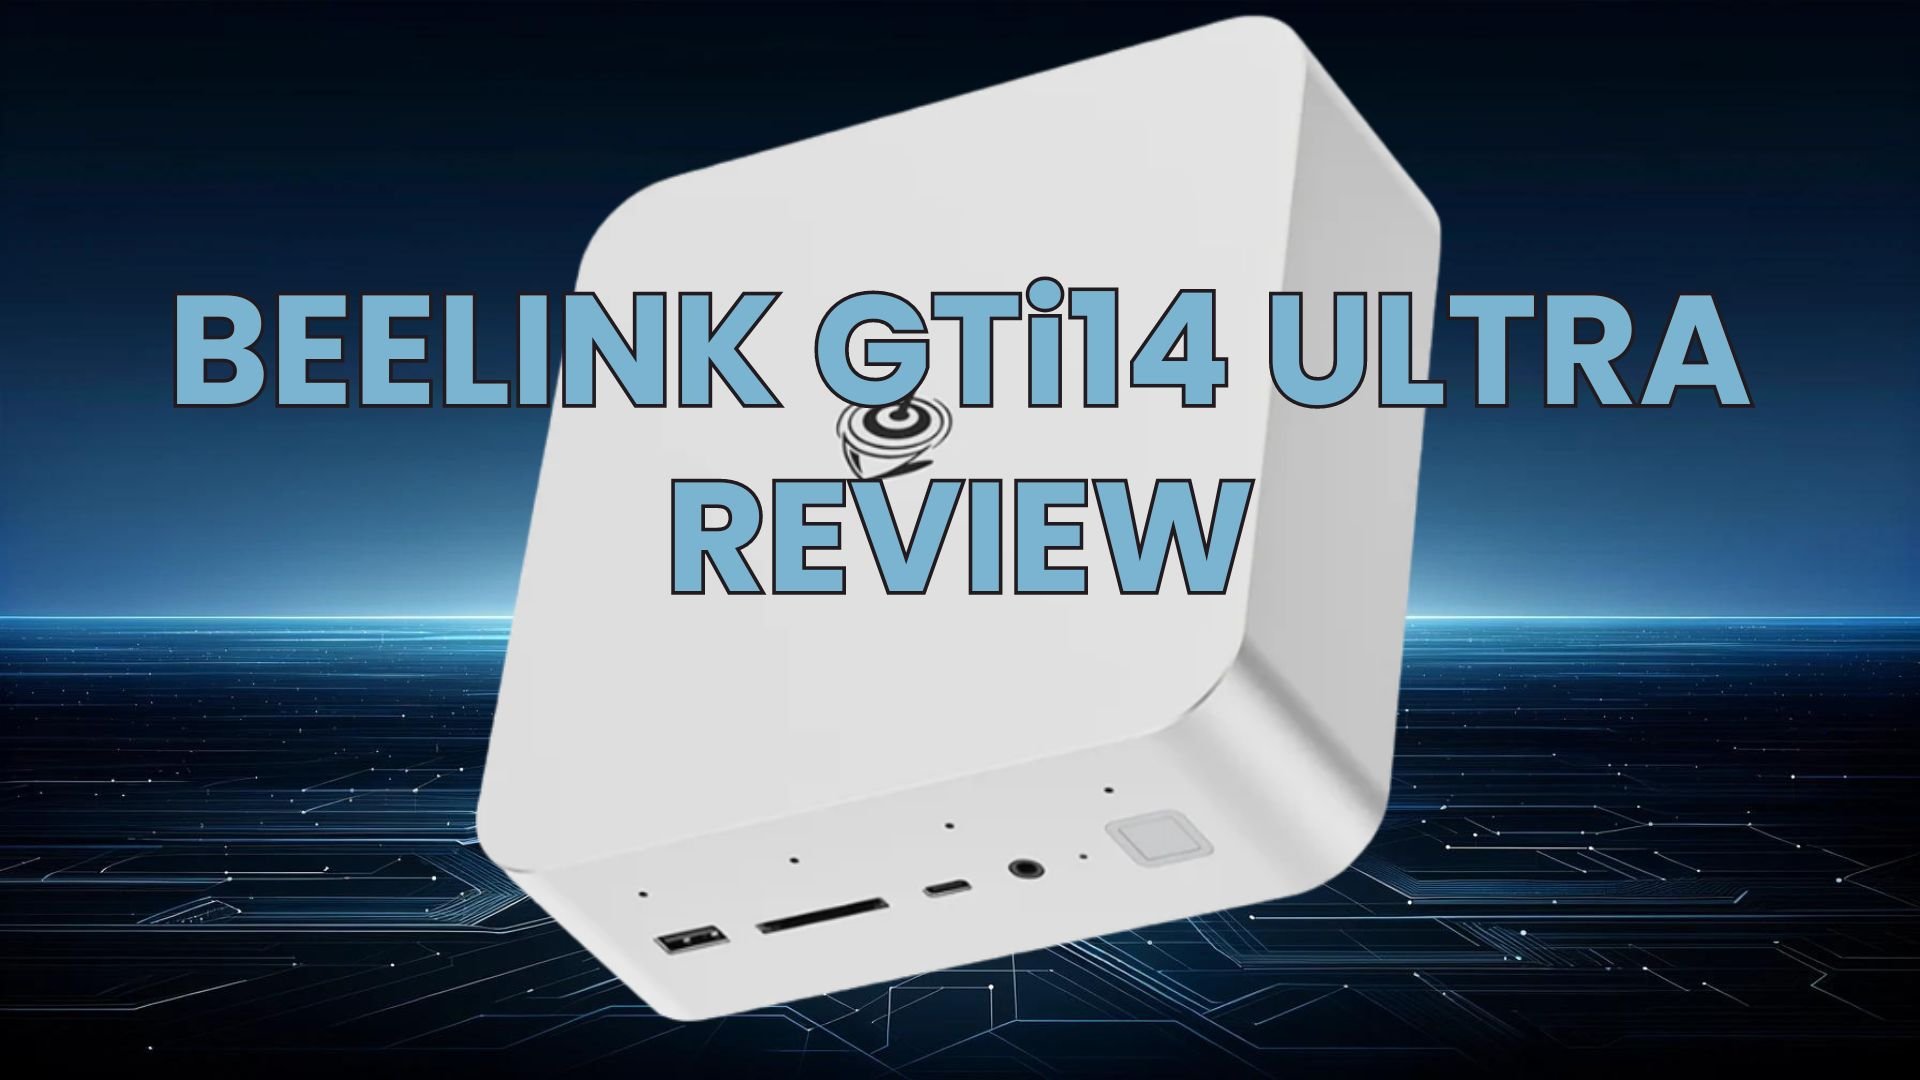 Beelink GTi14 Ultra Review: Gaming Powerhouse mini PC with SSD and PCIe for an Unbeatable Experience